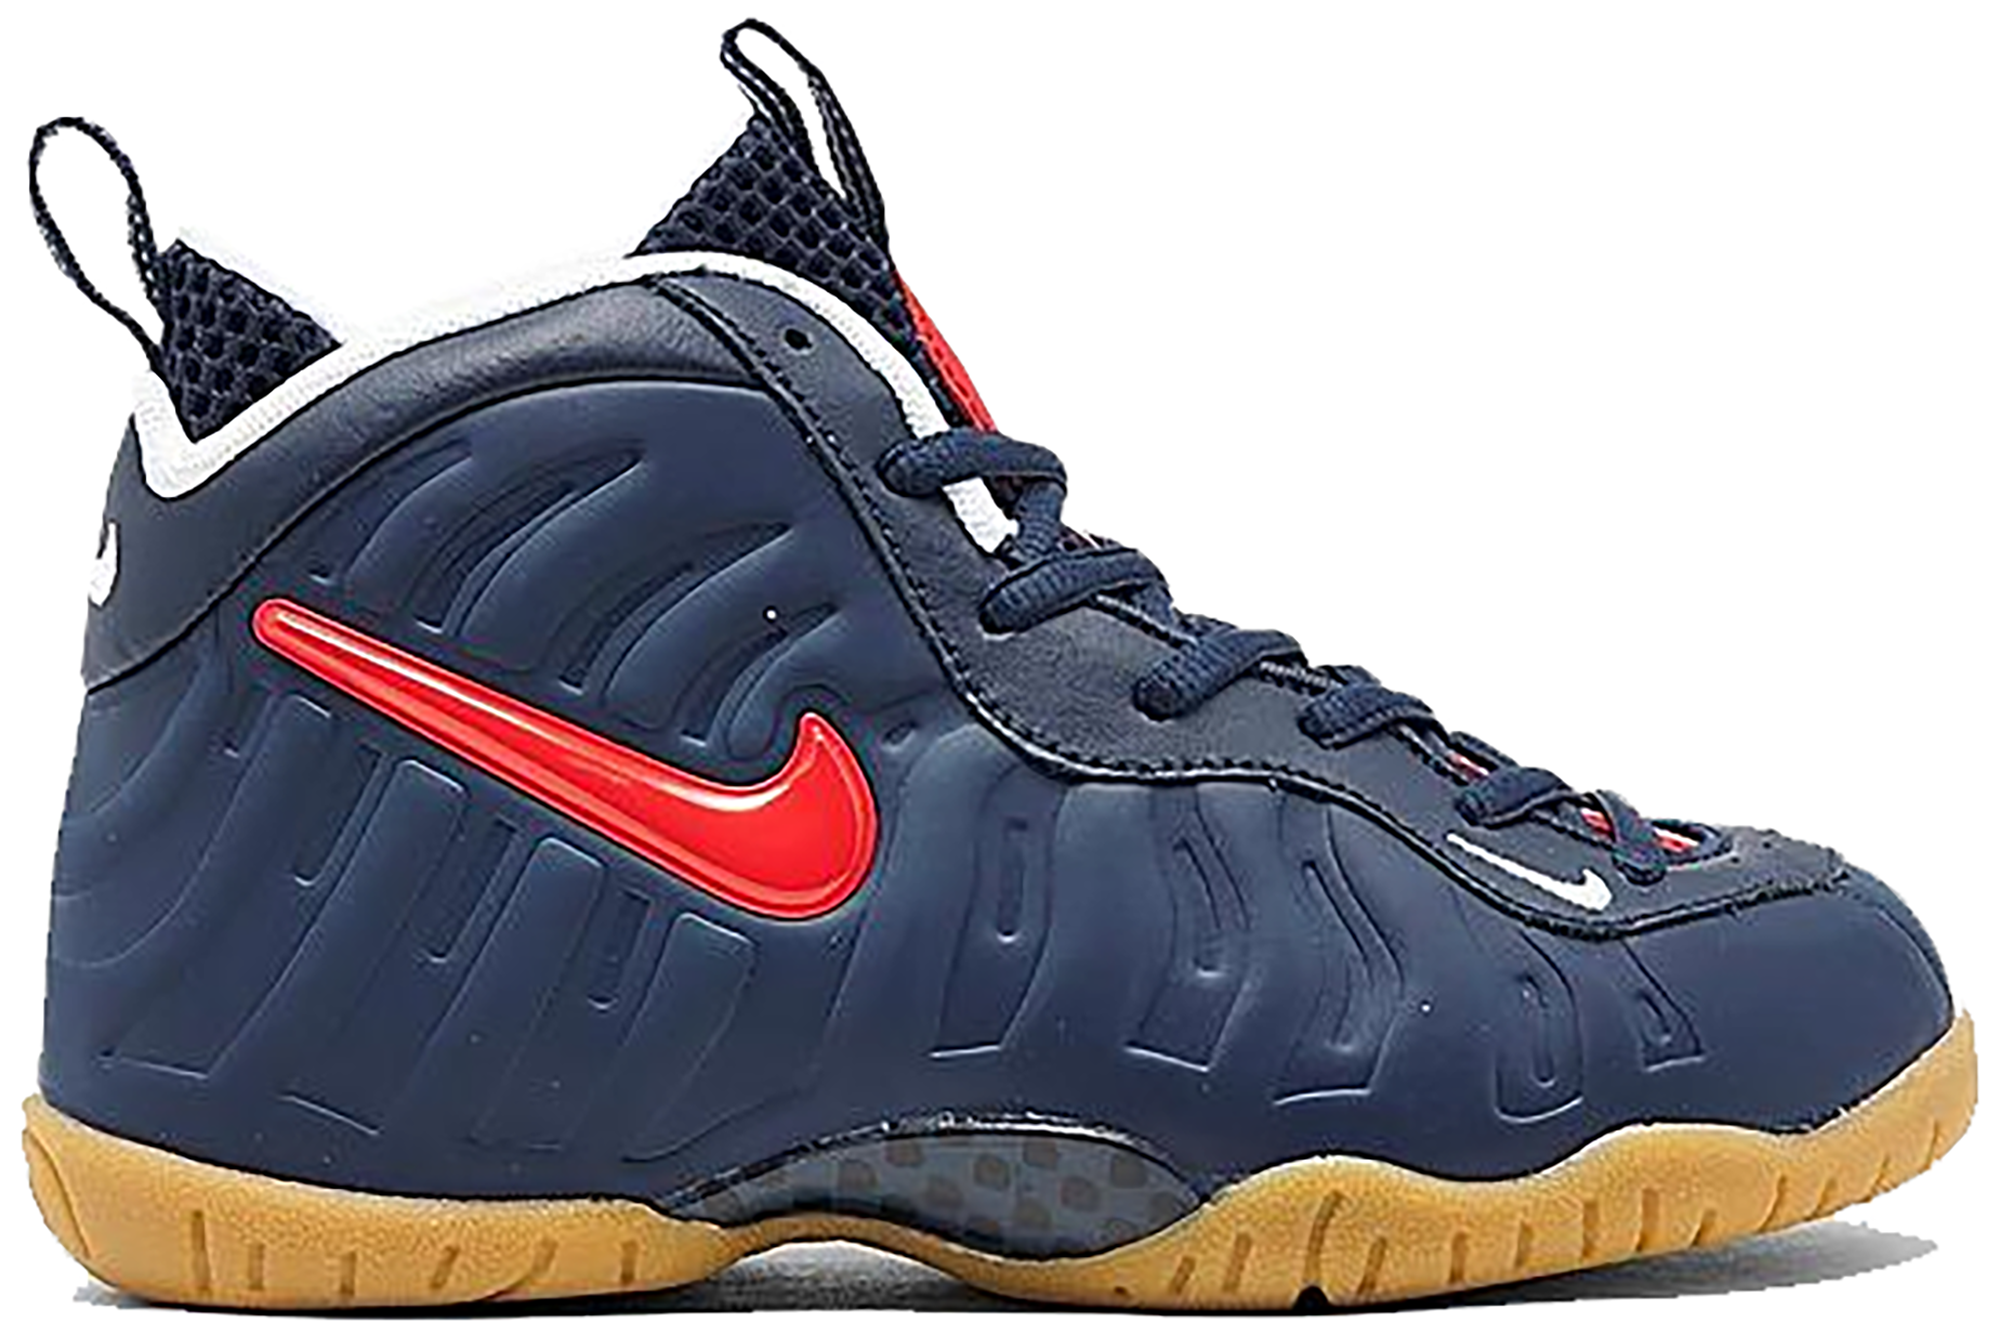 Nike Air Foamposite Pro Blue Void University Red (PS)